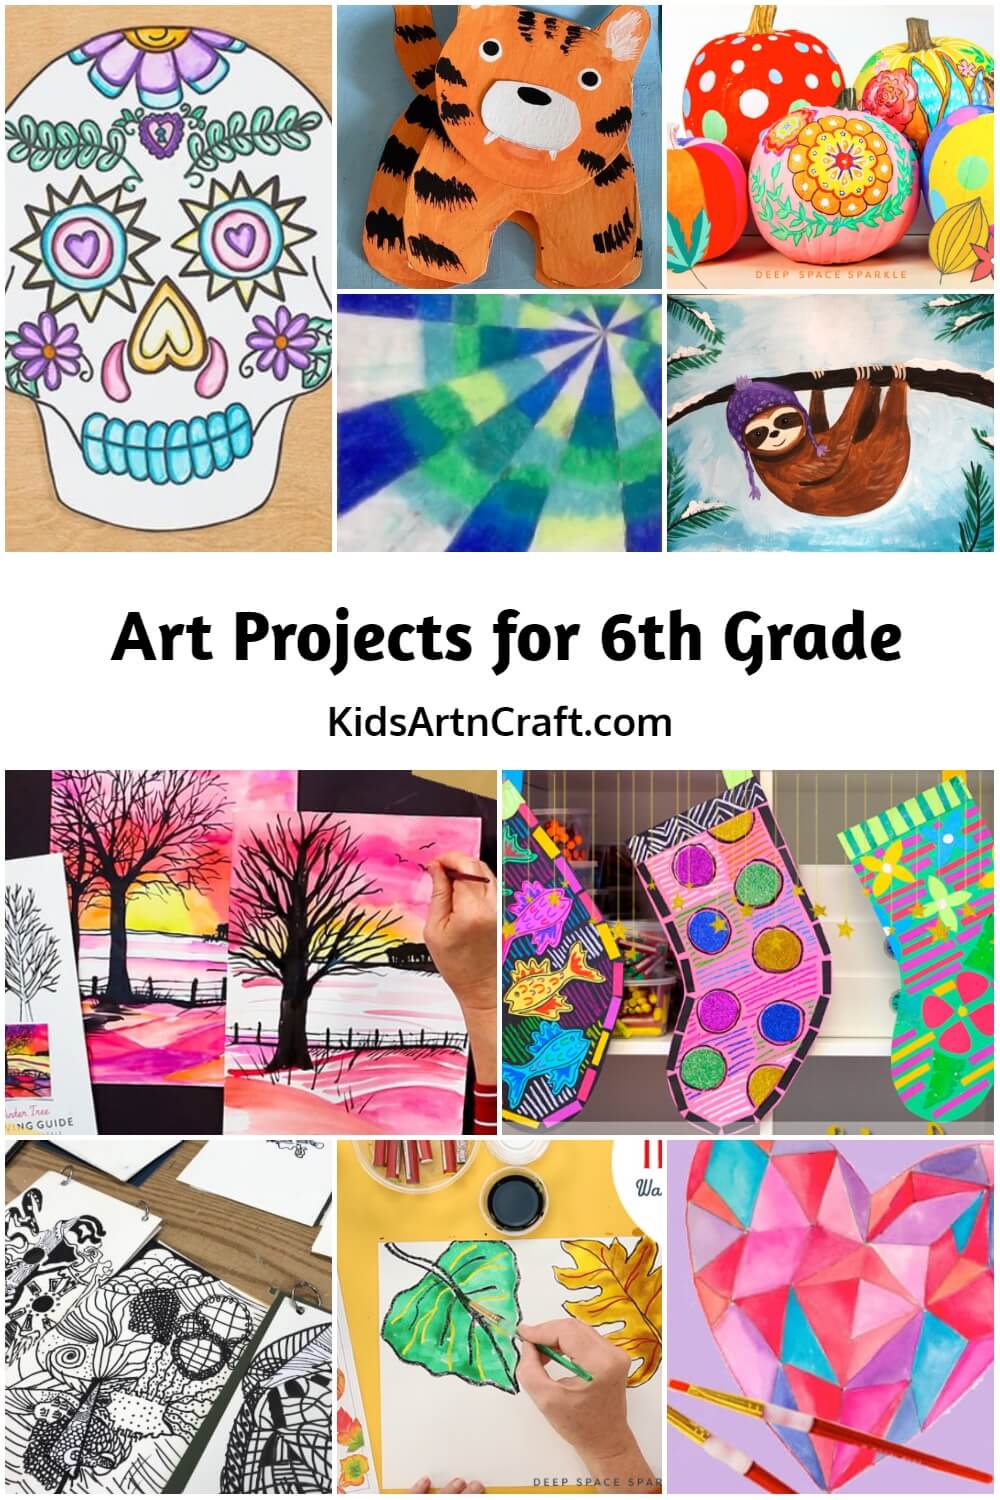 Art Projects for 6th Grade